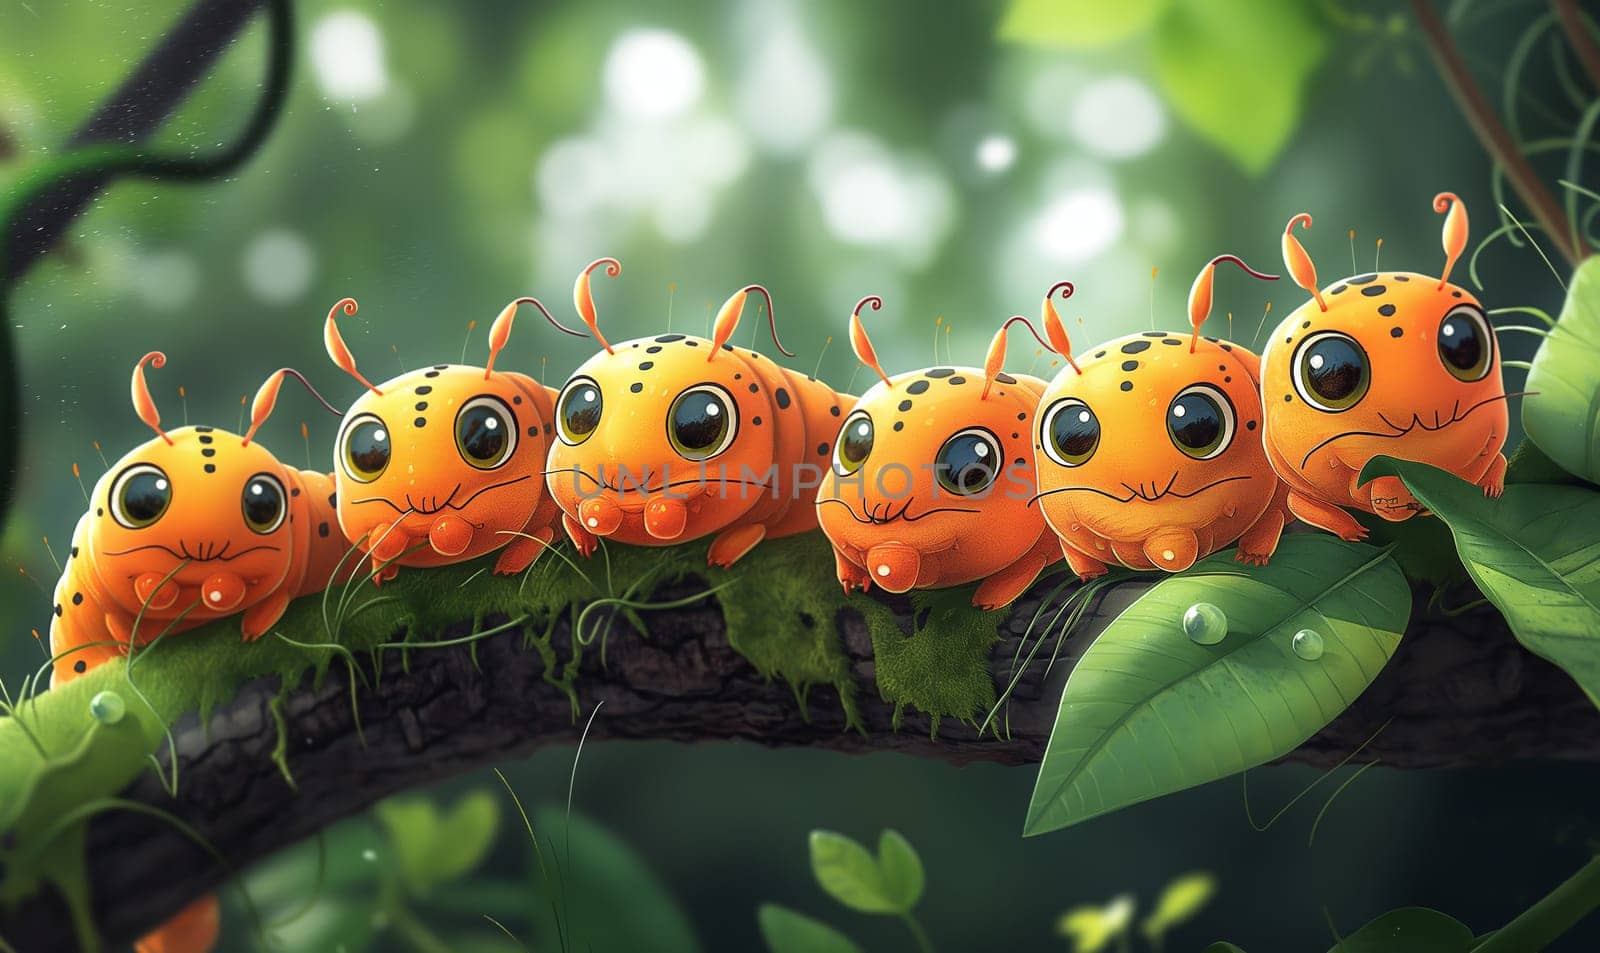 Group of orange caterpillars gathered on a tree branch.